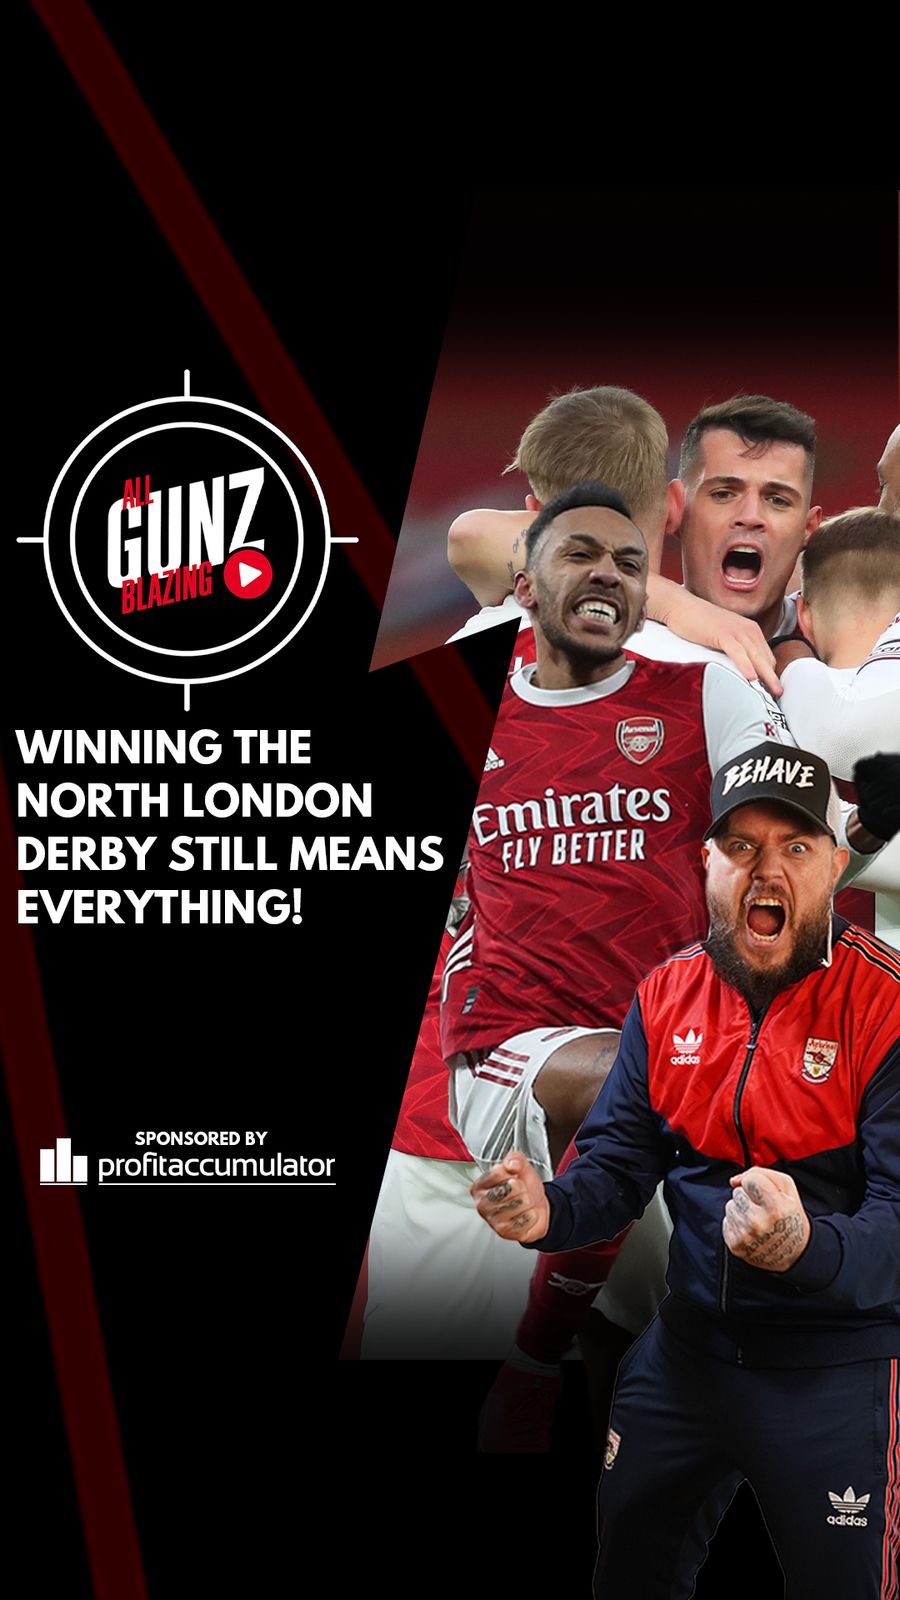 S3 Ep87: Winning The North London Derby Still Means Everything! | All Gunz Blazing Podcast Ft DT